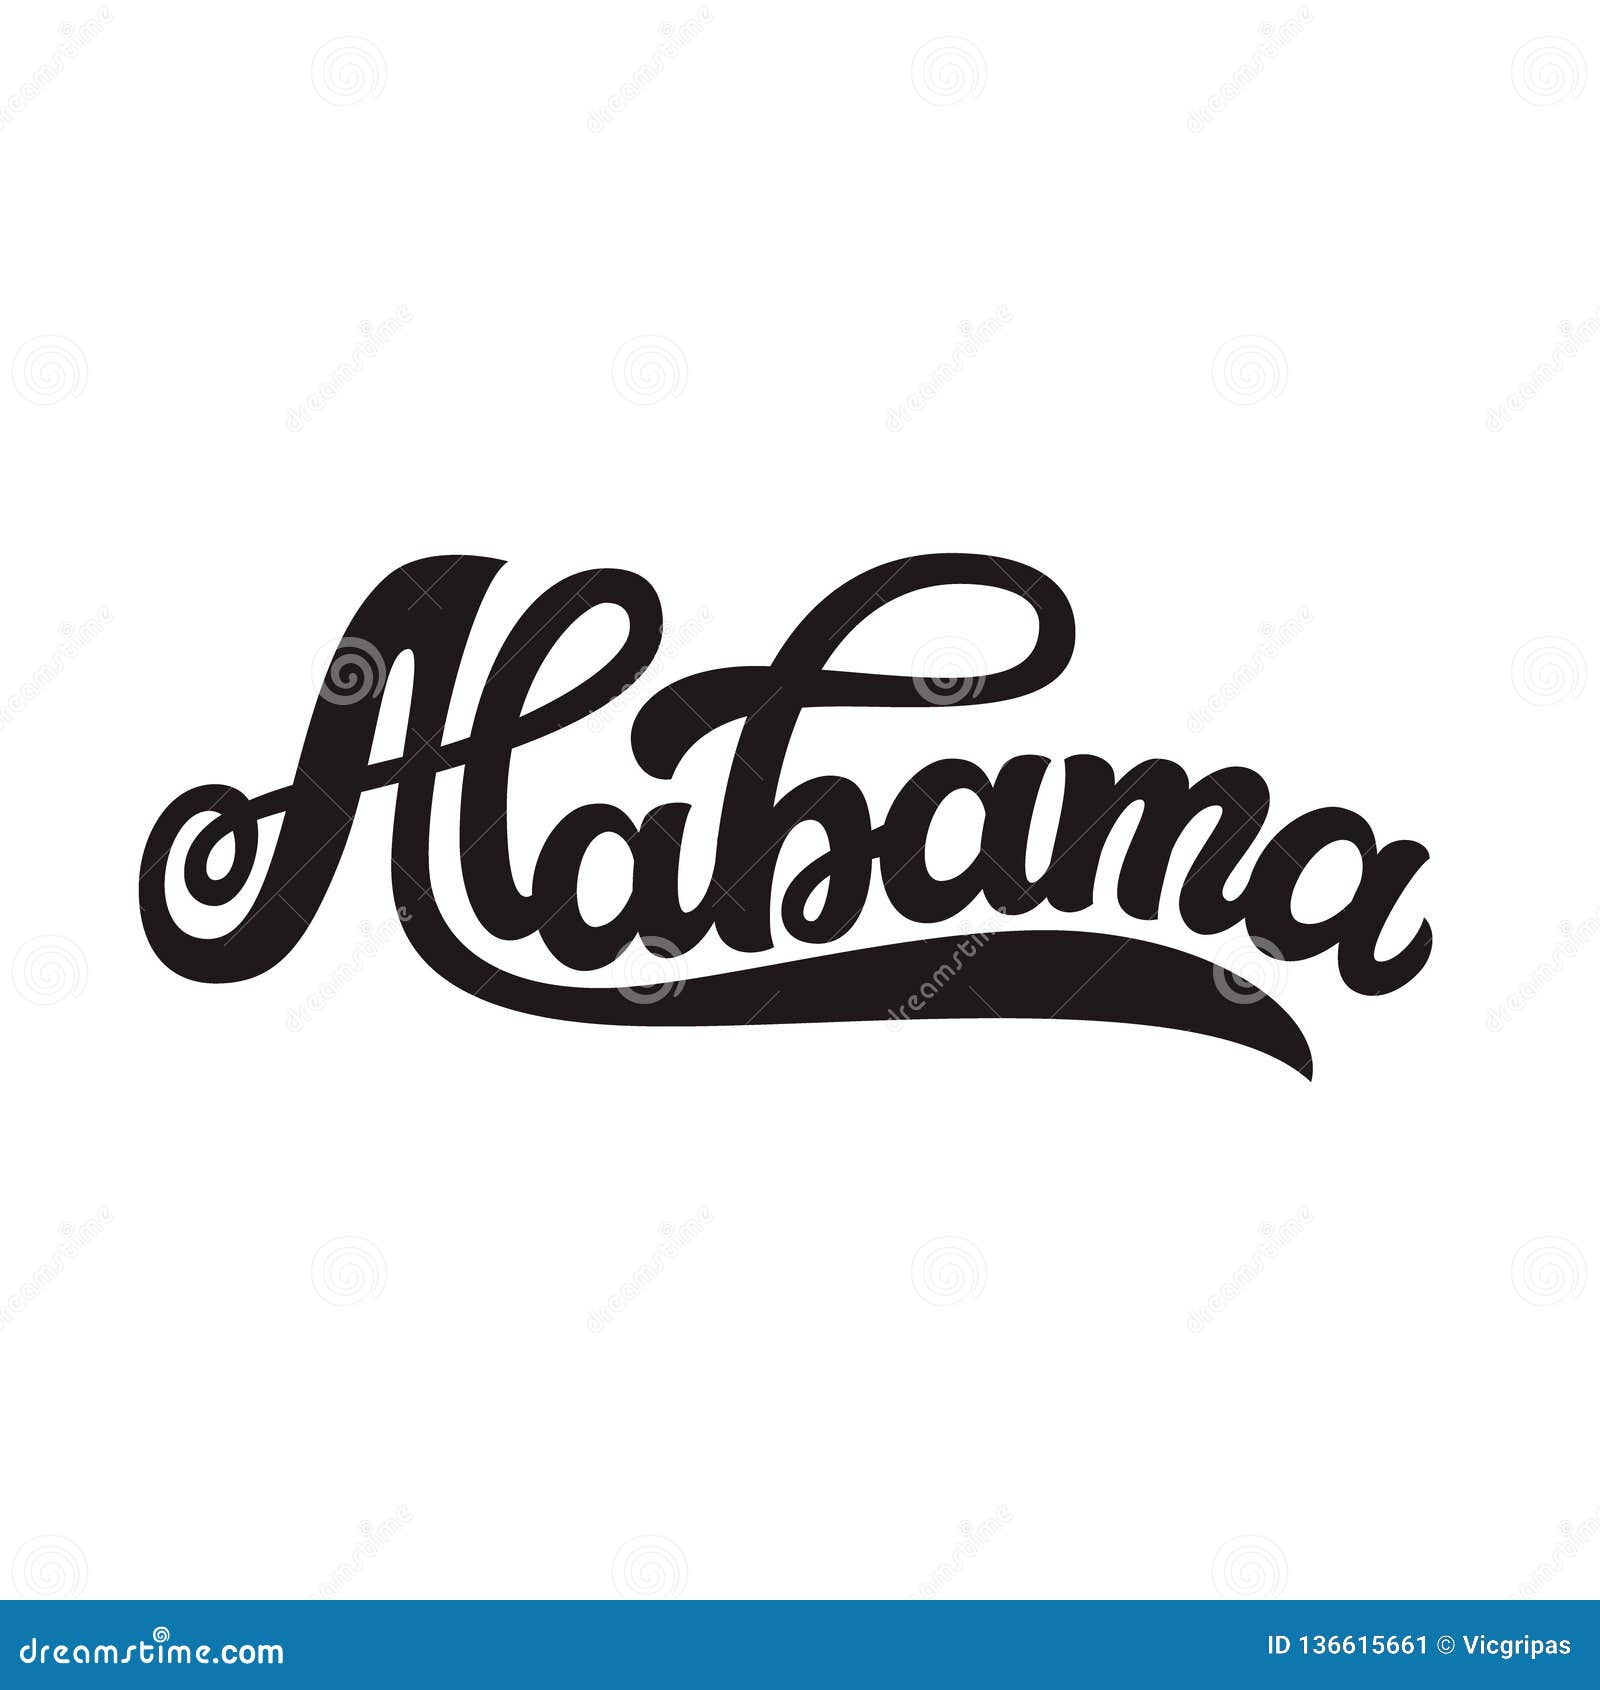 Alabama. Hand Drawn Lettering Text Stock Vector Illustration of